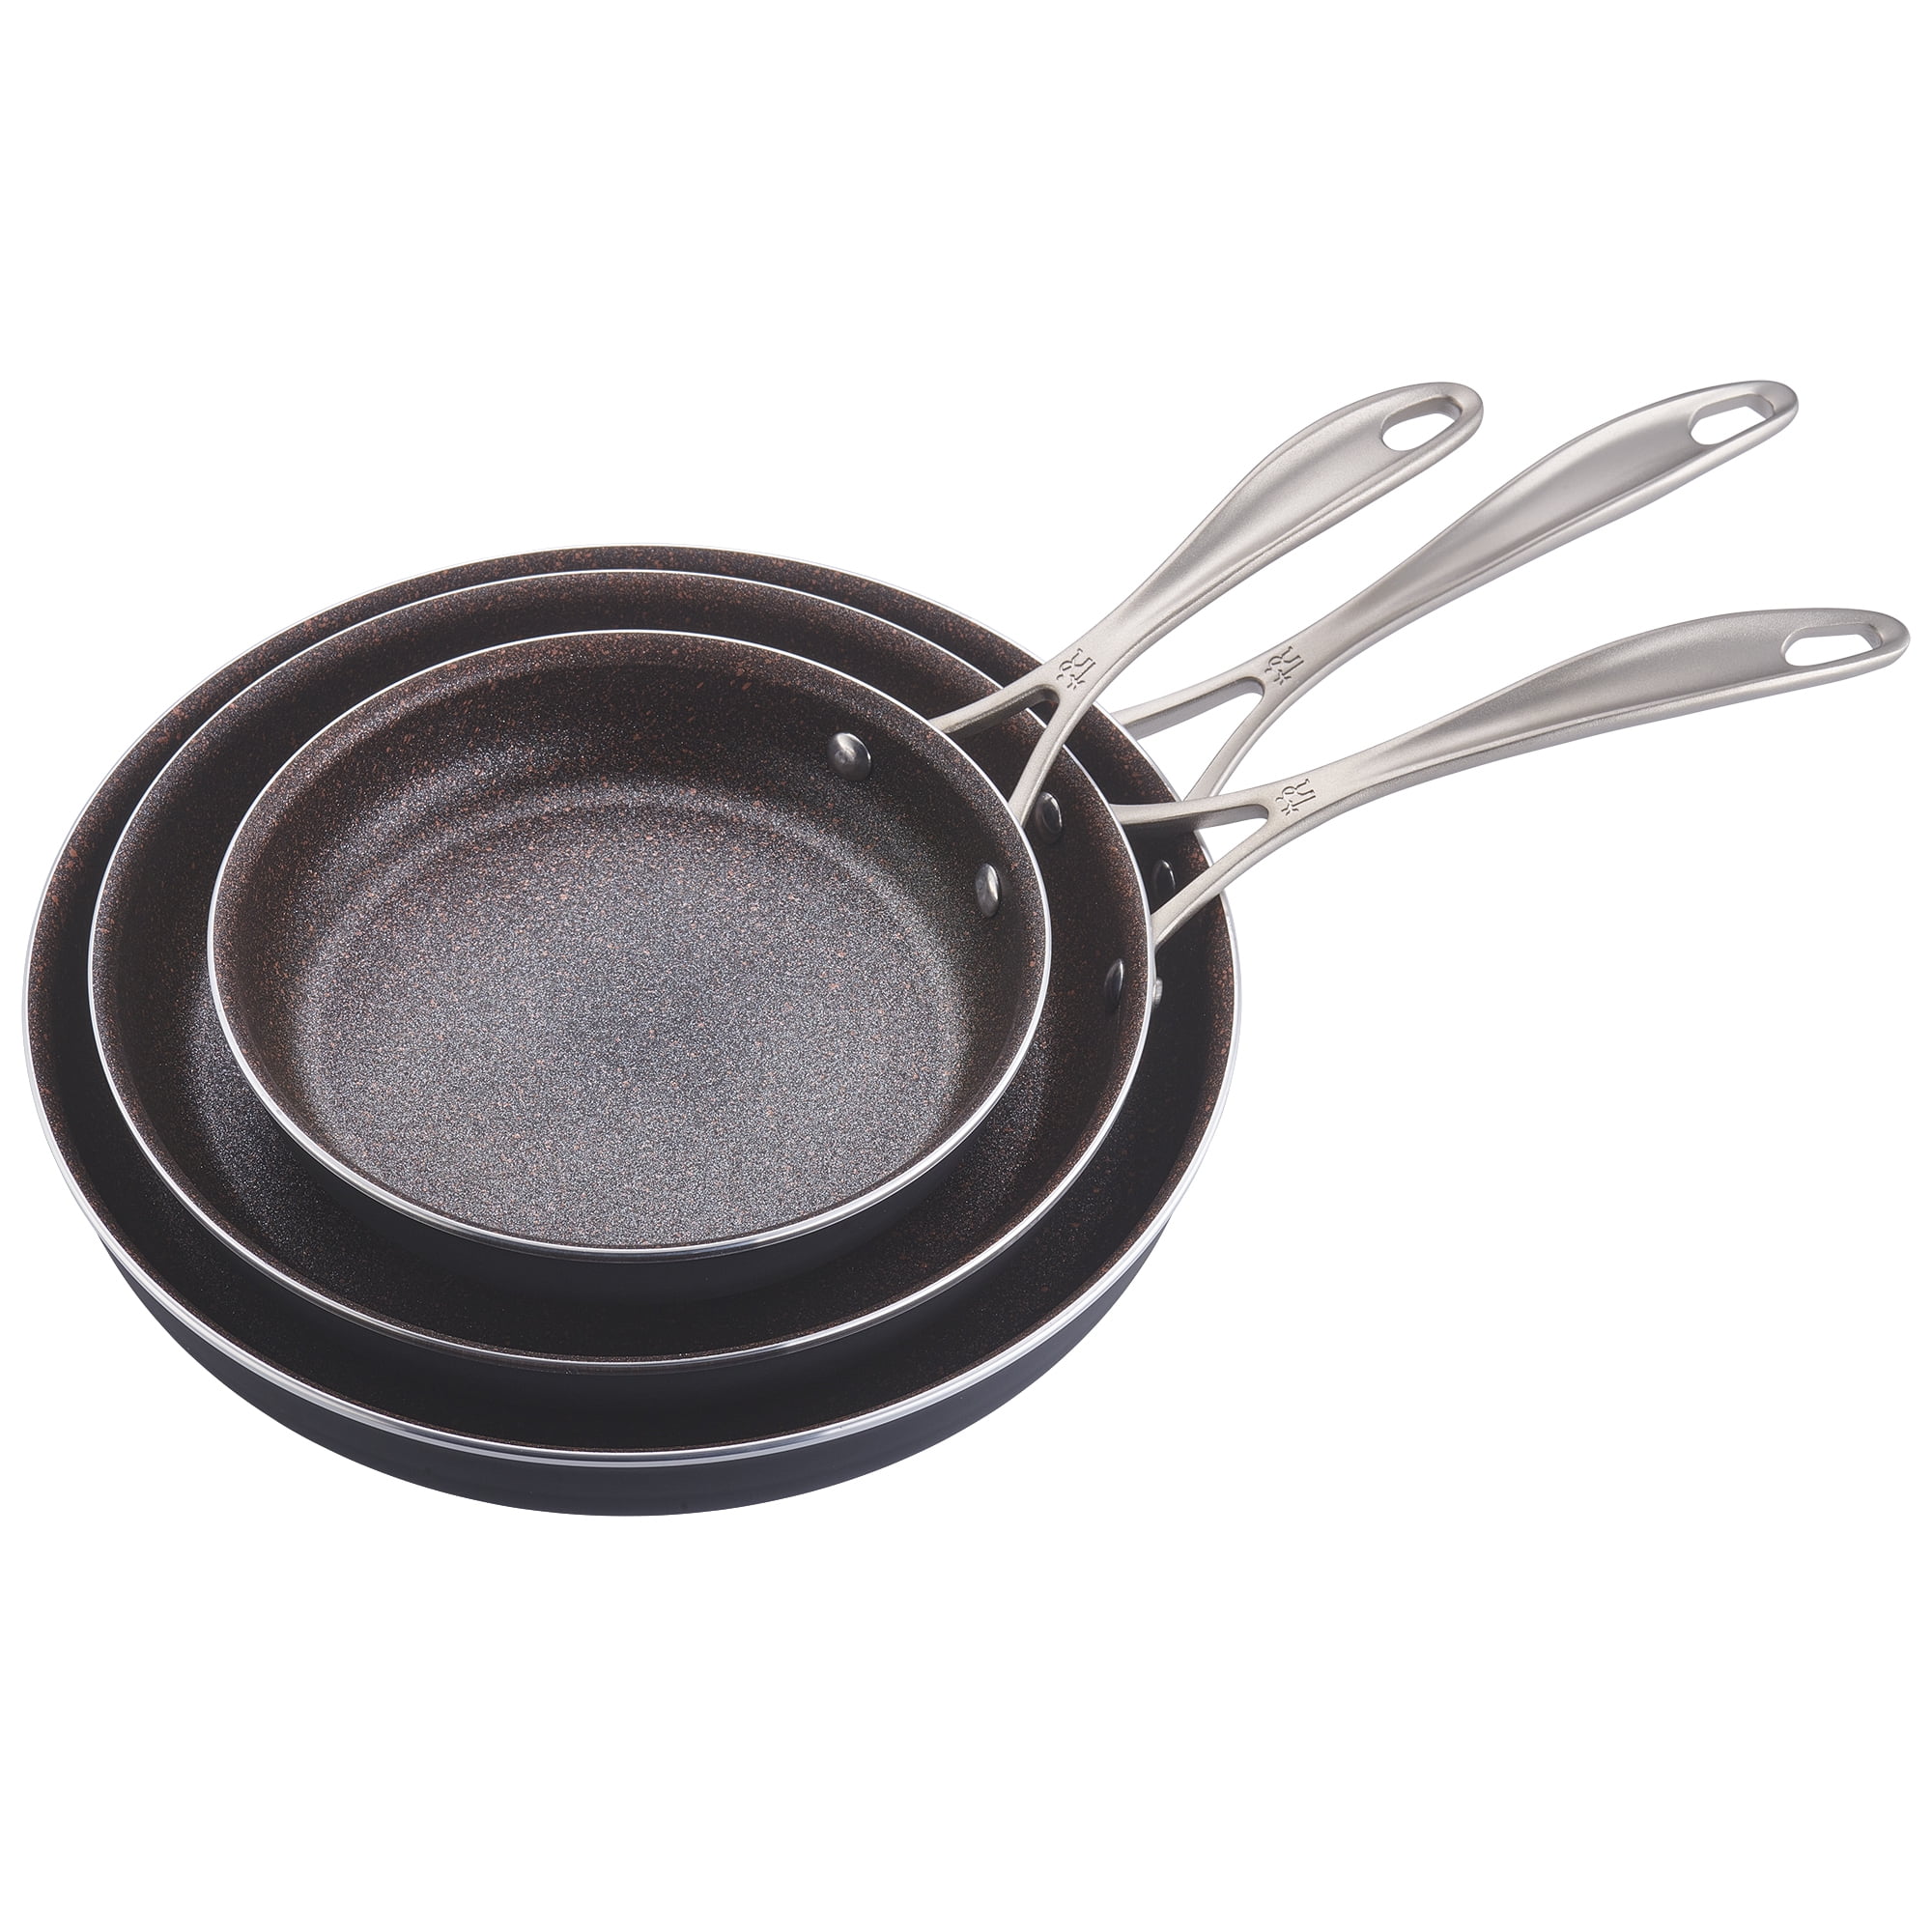 40cm Double Grill Pan in Garki 2 - Kitchenware & Cookware, Great Pec  Synergy